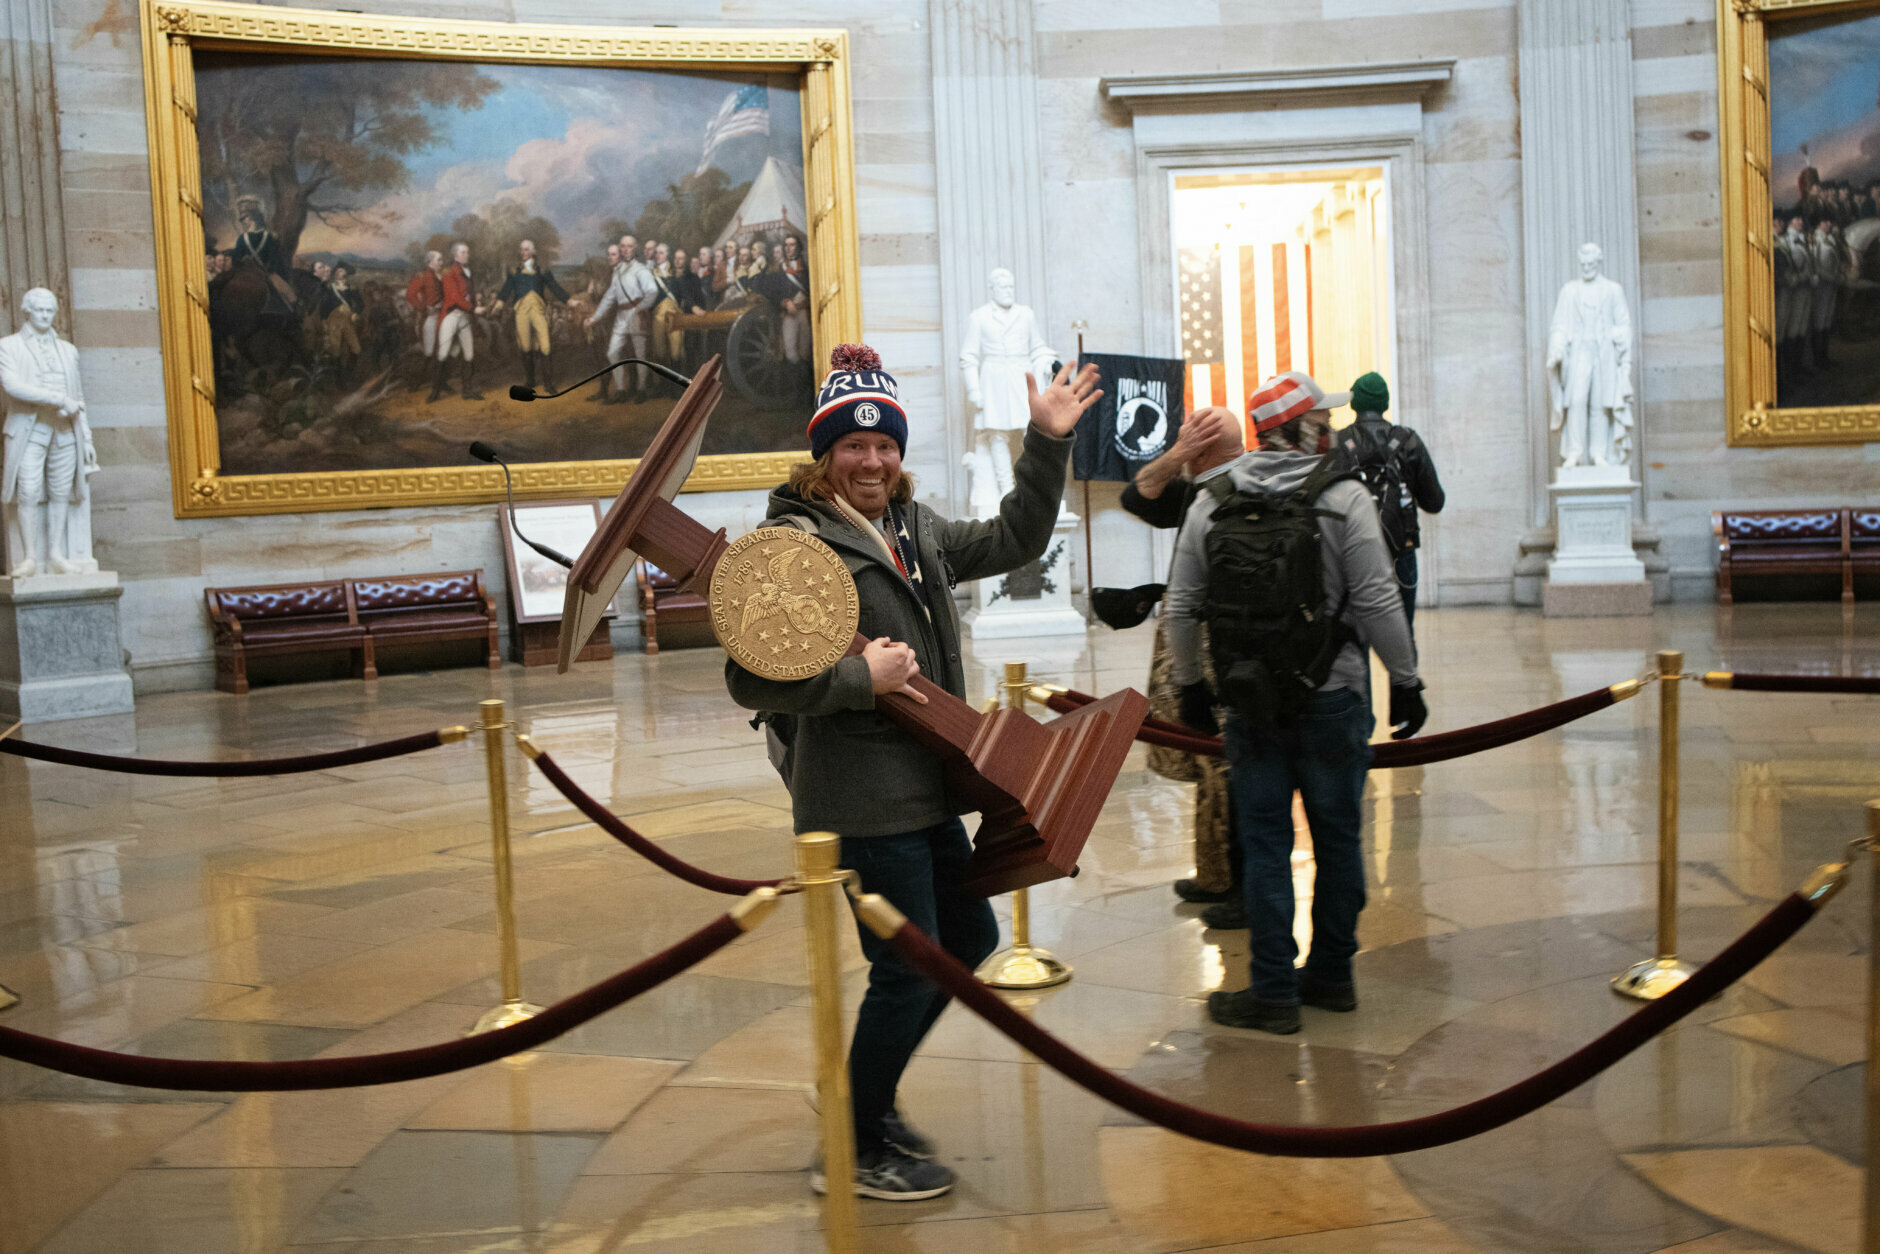 WASHINGTON, DC - JANUARY 06:  A pro-Trump protester carries the lectern of U.S. Speaker of the House Nancy Pelosi through the Roturnda of the U.S. Capitol Building after a pro-Trump mob stormed the building on January 06, 2021 in Washington, DC. Congress held a joint session today to ratify President-elect Joe Biden's 306-232 Electoral College win over President Donald Trump. A group of Republican senators said they would reject the Electoral College votes of several states unless Congress appointed a commission to audit the election results. (Photo by Win McNamee/Getty Images)